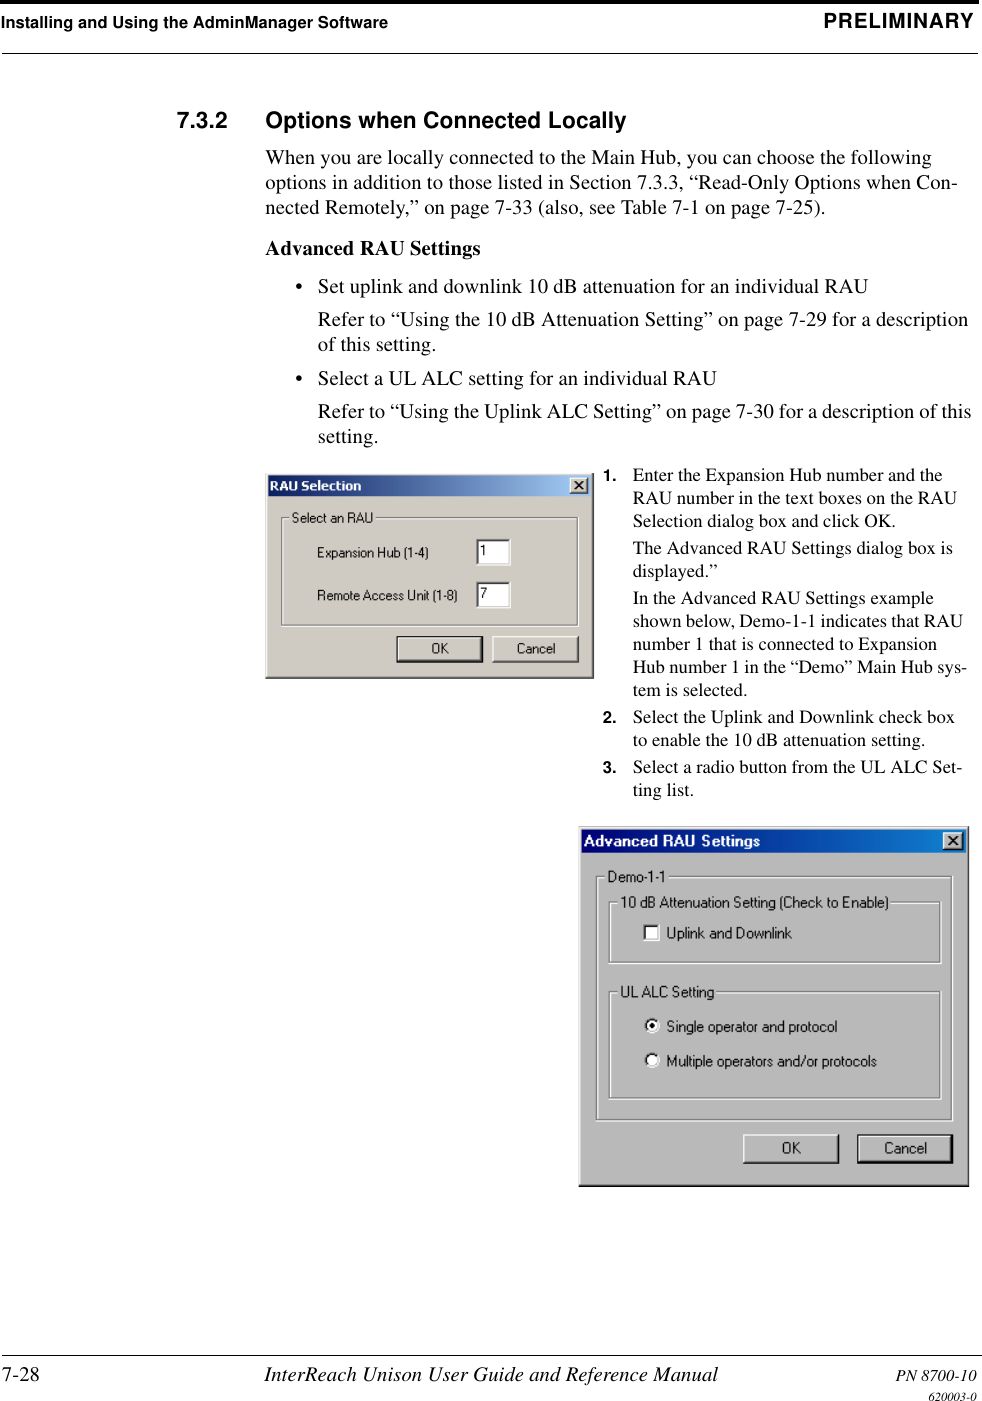 Installing and Using the AdminManager Software PRELIMINARY7-28 InterReach Unison User Guide and Reference Manual PN 8700-10620003-07.3.2 Options when Connected LocallyWhen you are locally connected to the Main Hub, you can choose the following options in addition to those listed in Section 7.3.3, “Read-Only Options when Con-nected Remotely,” on page 7-33 (also, see Table 7-1 on page 7-25).Advanced RAU Settings• Set uplink and downlink 10 dB attenuation for an individual RAURefer to “Using the 10 dB Attenuation Setting” on page 7-29 for a description of this setting.• Select a UL ALC setting for an individual RAURefer to “Using the Uplink ALC Setting” on page 7-30 for a description of this setting.1. Enter the Expansion Hub number and the RAU number in the text boxes on the RAU Selection dialog box and click OK.The Advanced RAU Settings dialog box is displayed.”In the Advanced RAU Settings example shown below, Demo-1-1 indicates that RAU number 1 that is connected to Expansion Hub number 1 in the “Demo” Main Hub sys-tem is selected.2. Select the Uplink and Downlink check box to enable the 10 dB attenuation setting.3. Select a radio button from the UL ALC Set-ting list.